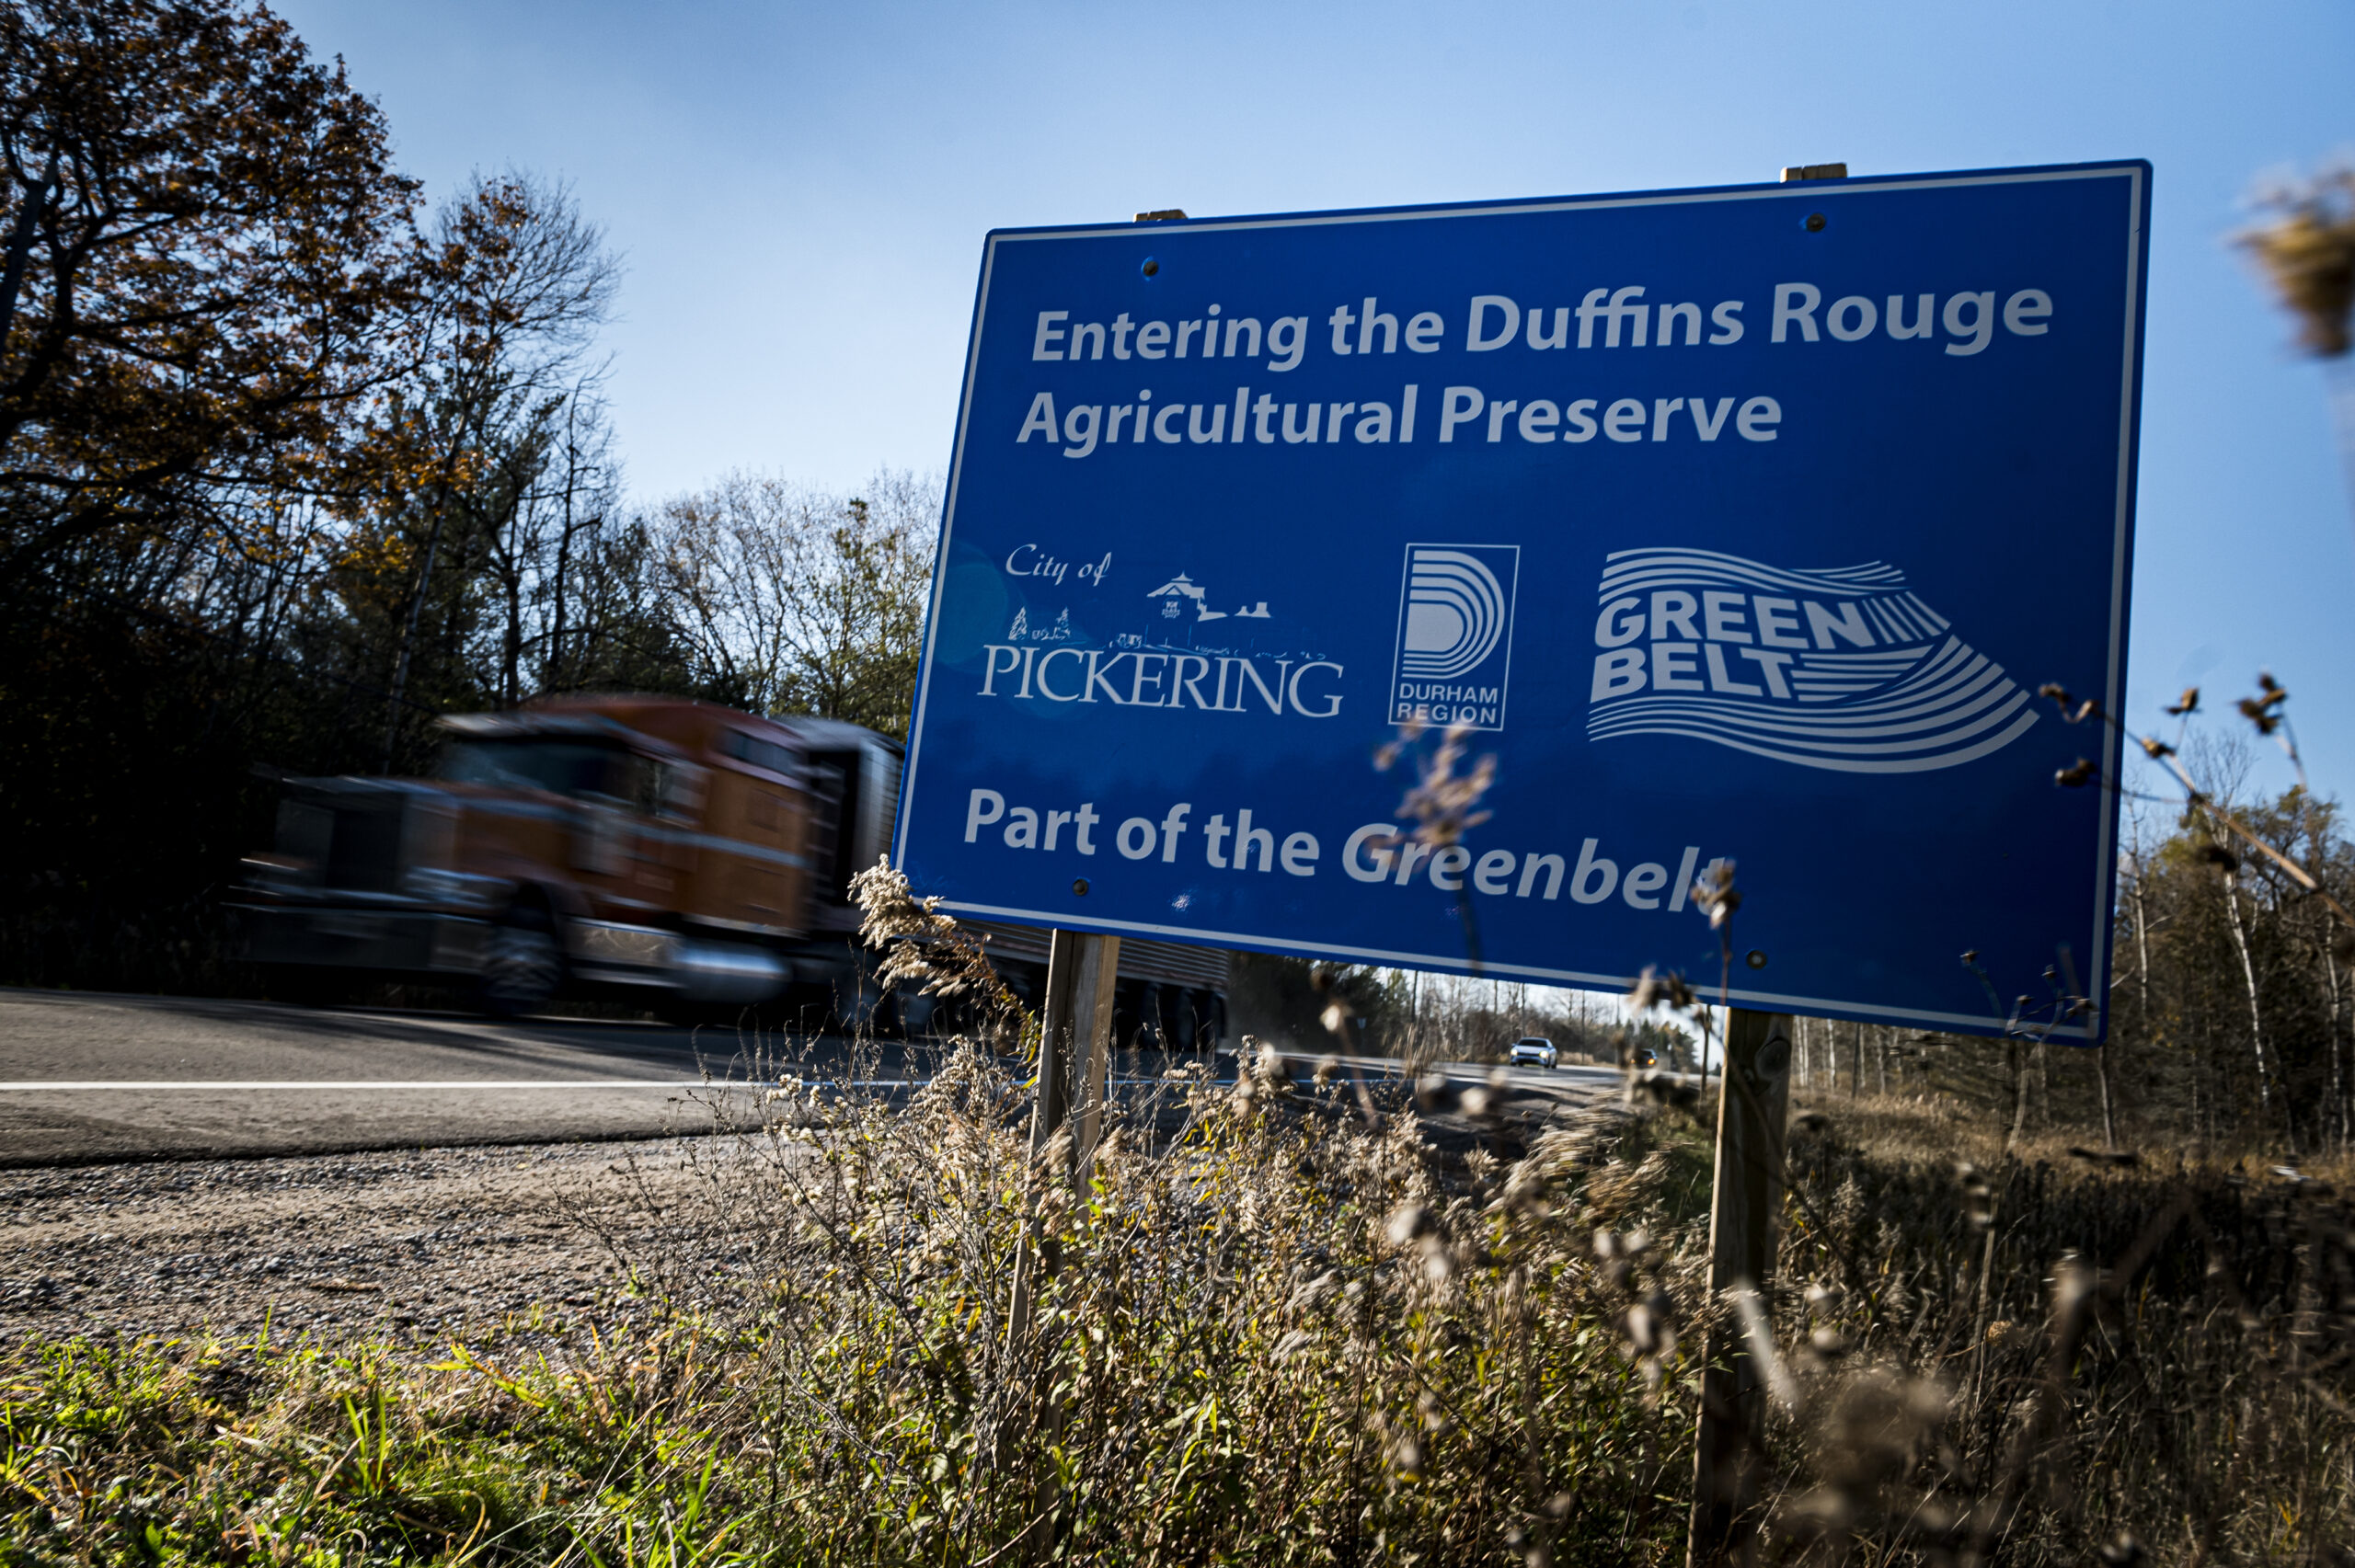 A sign describing passage into the Duffins Rouge Agricultural Preserve, in the Greenbelt, an area adjacent to Rouge National Urban Park.